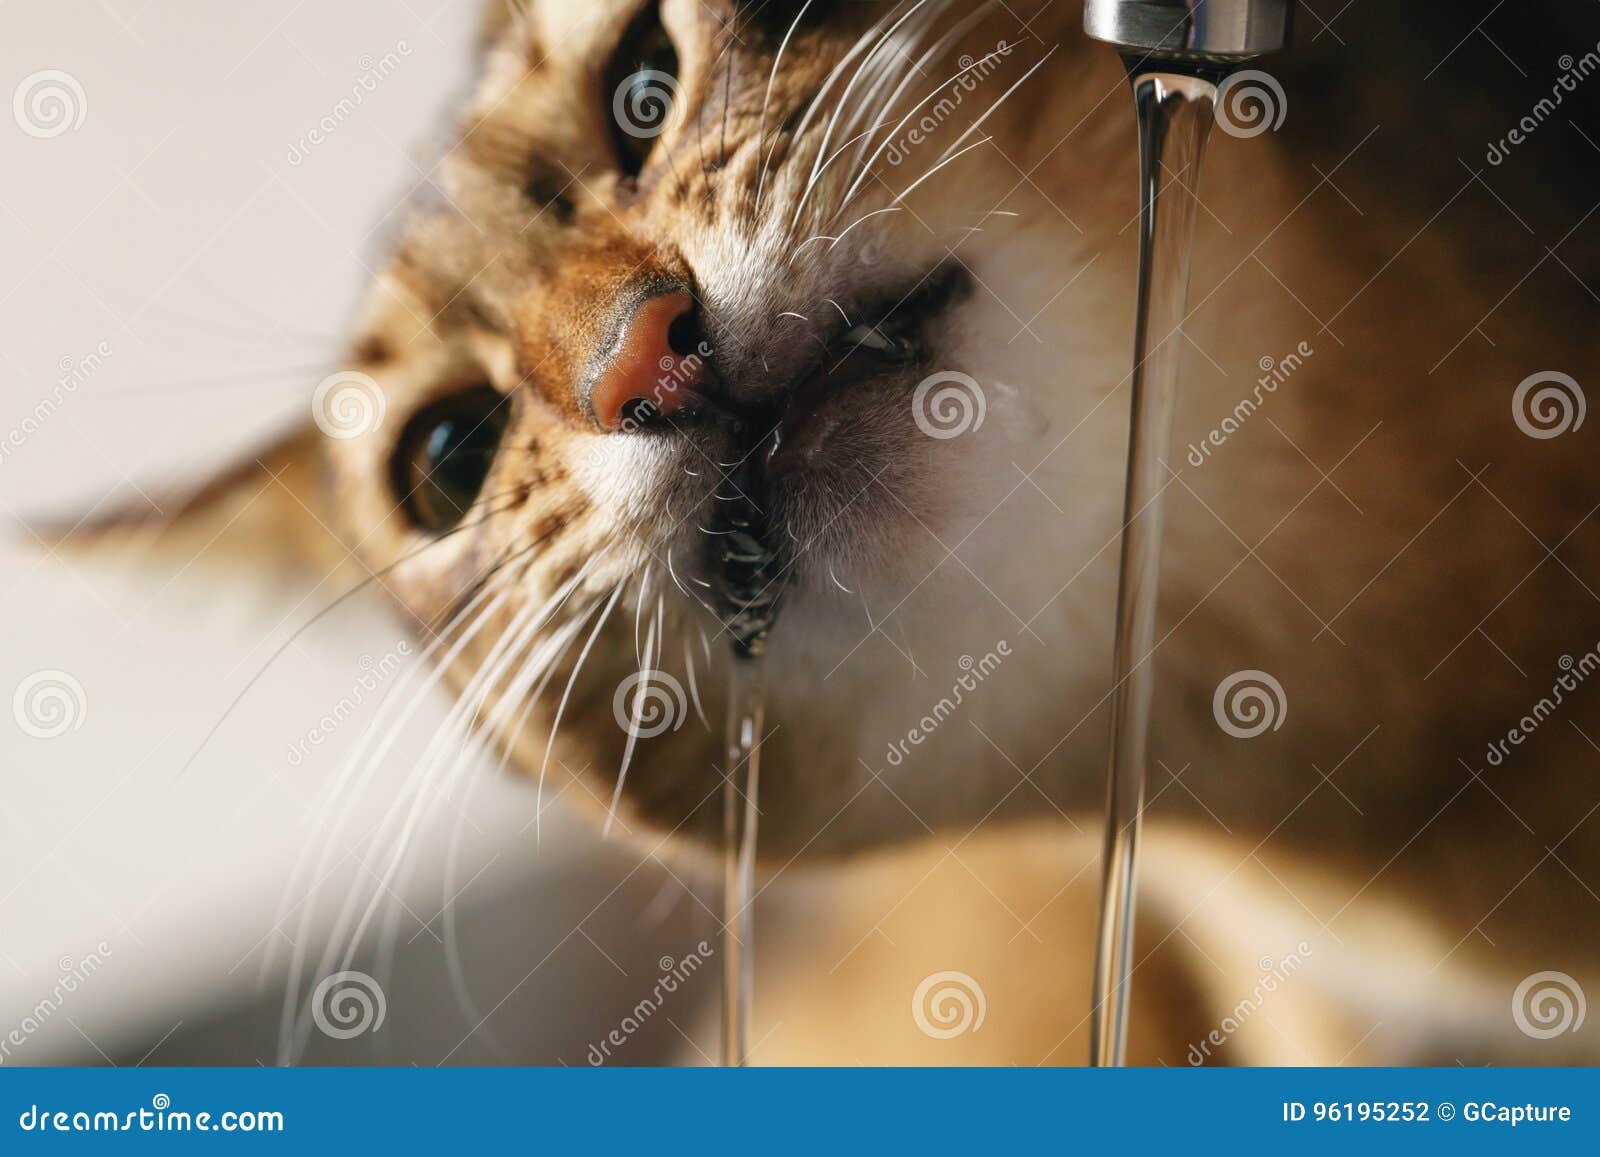 Closeup Shot Of Abyssinian Cat Drinking Water From Faucet Stock